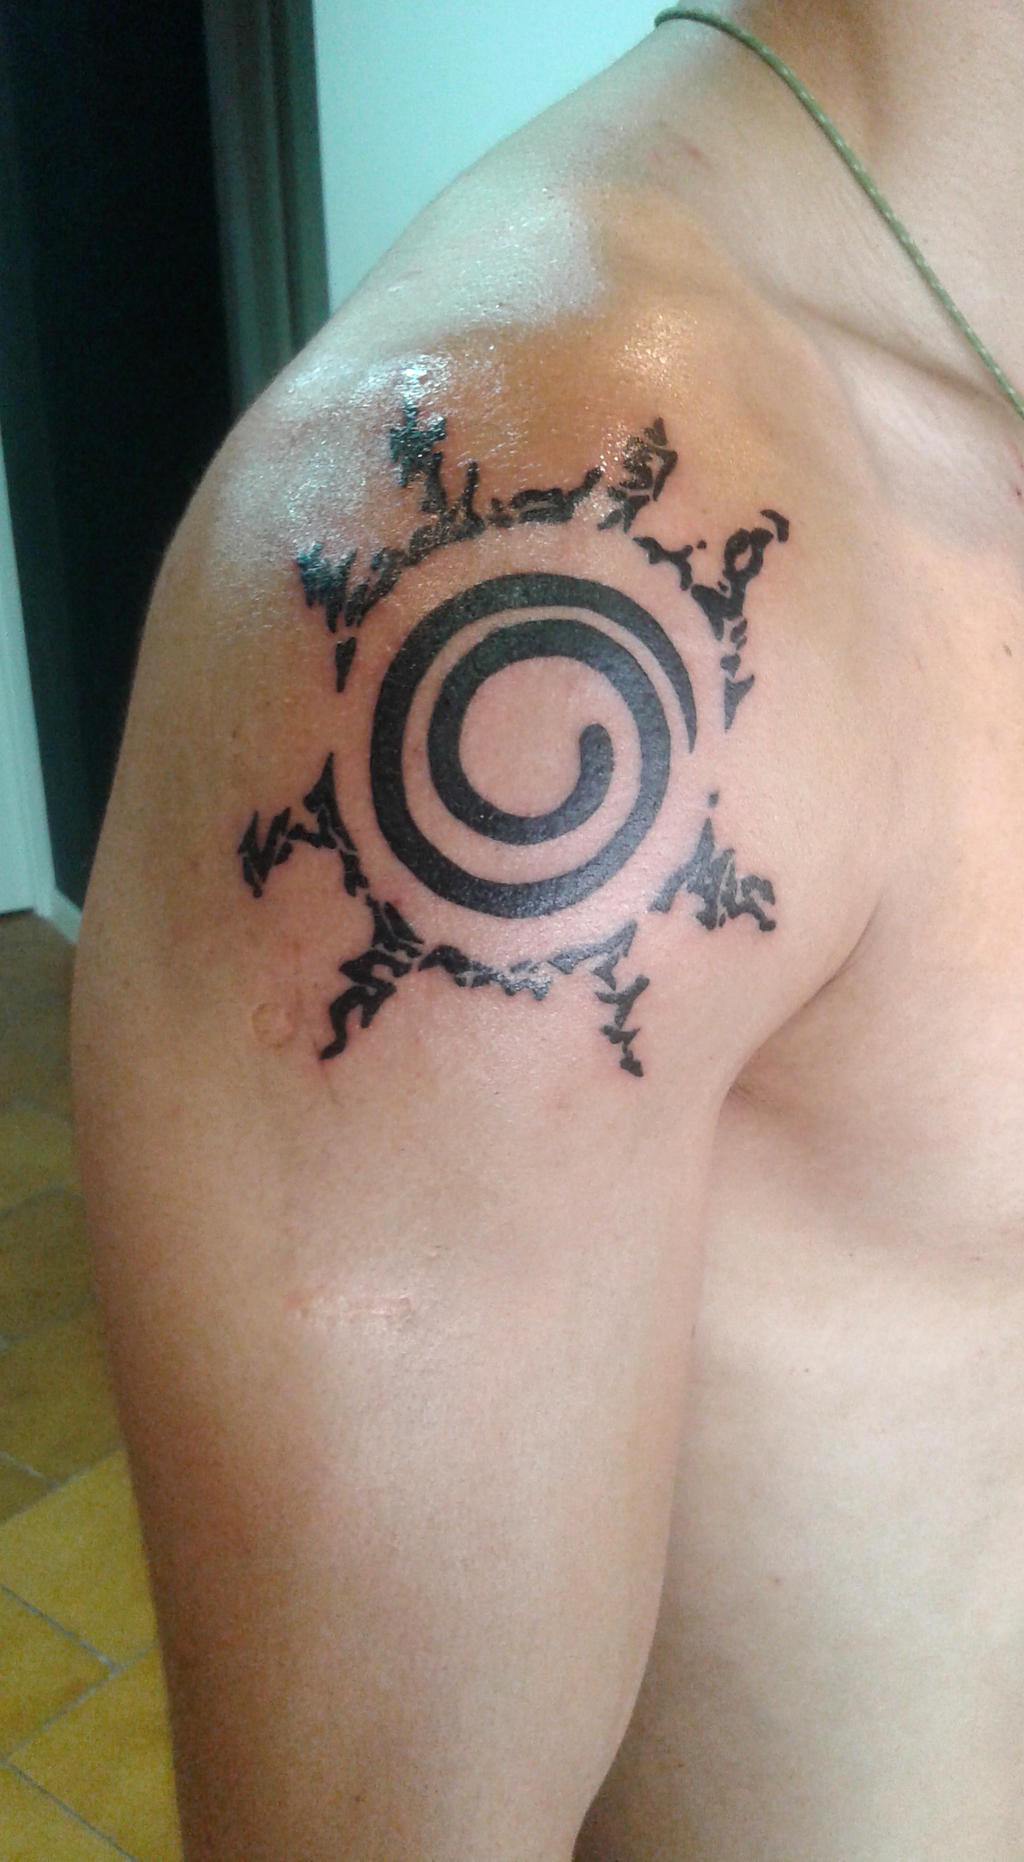 Naruto Seal tattoo by flaviudraghis on DeviantArt from img00.deviantart.net...